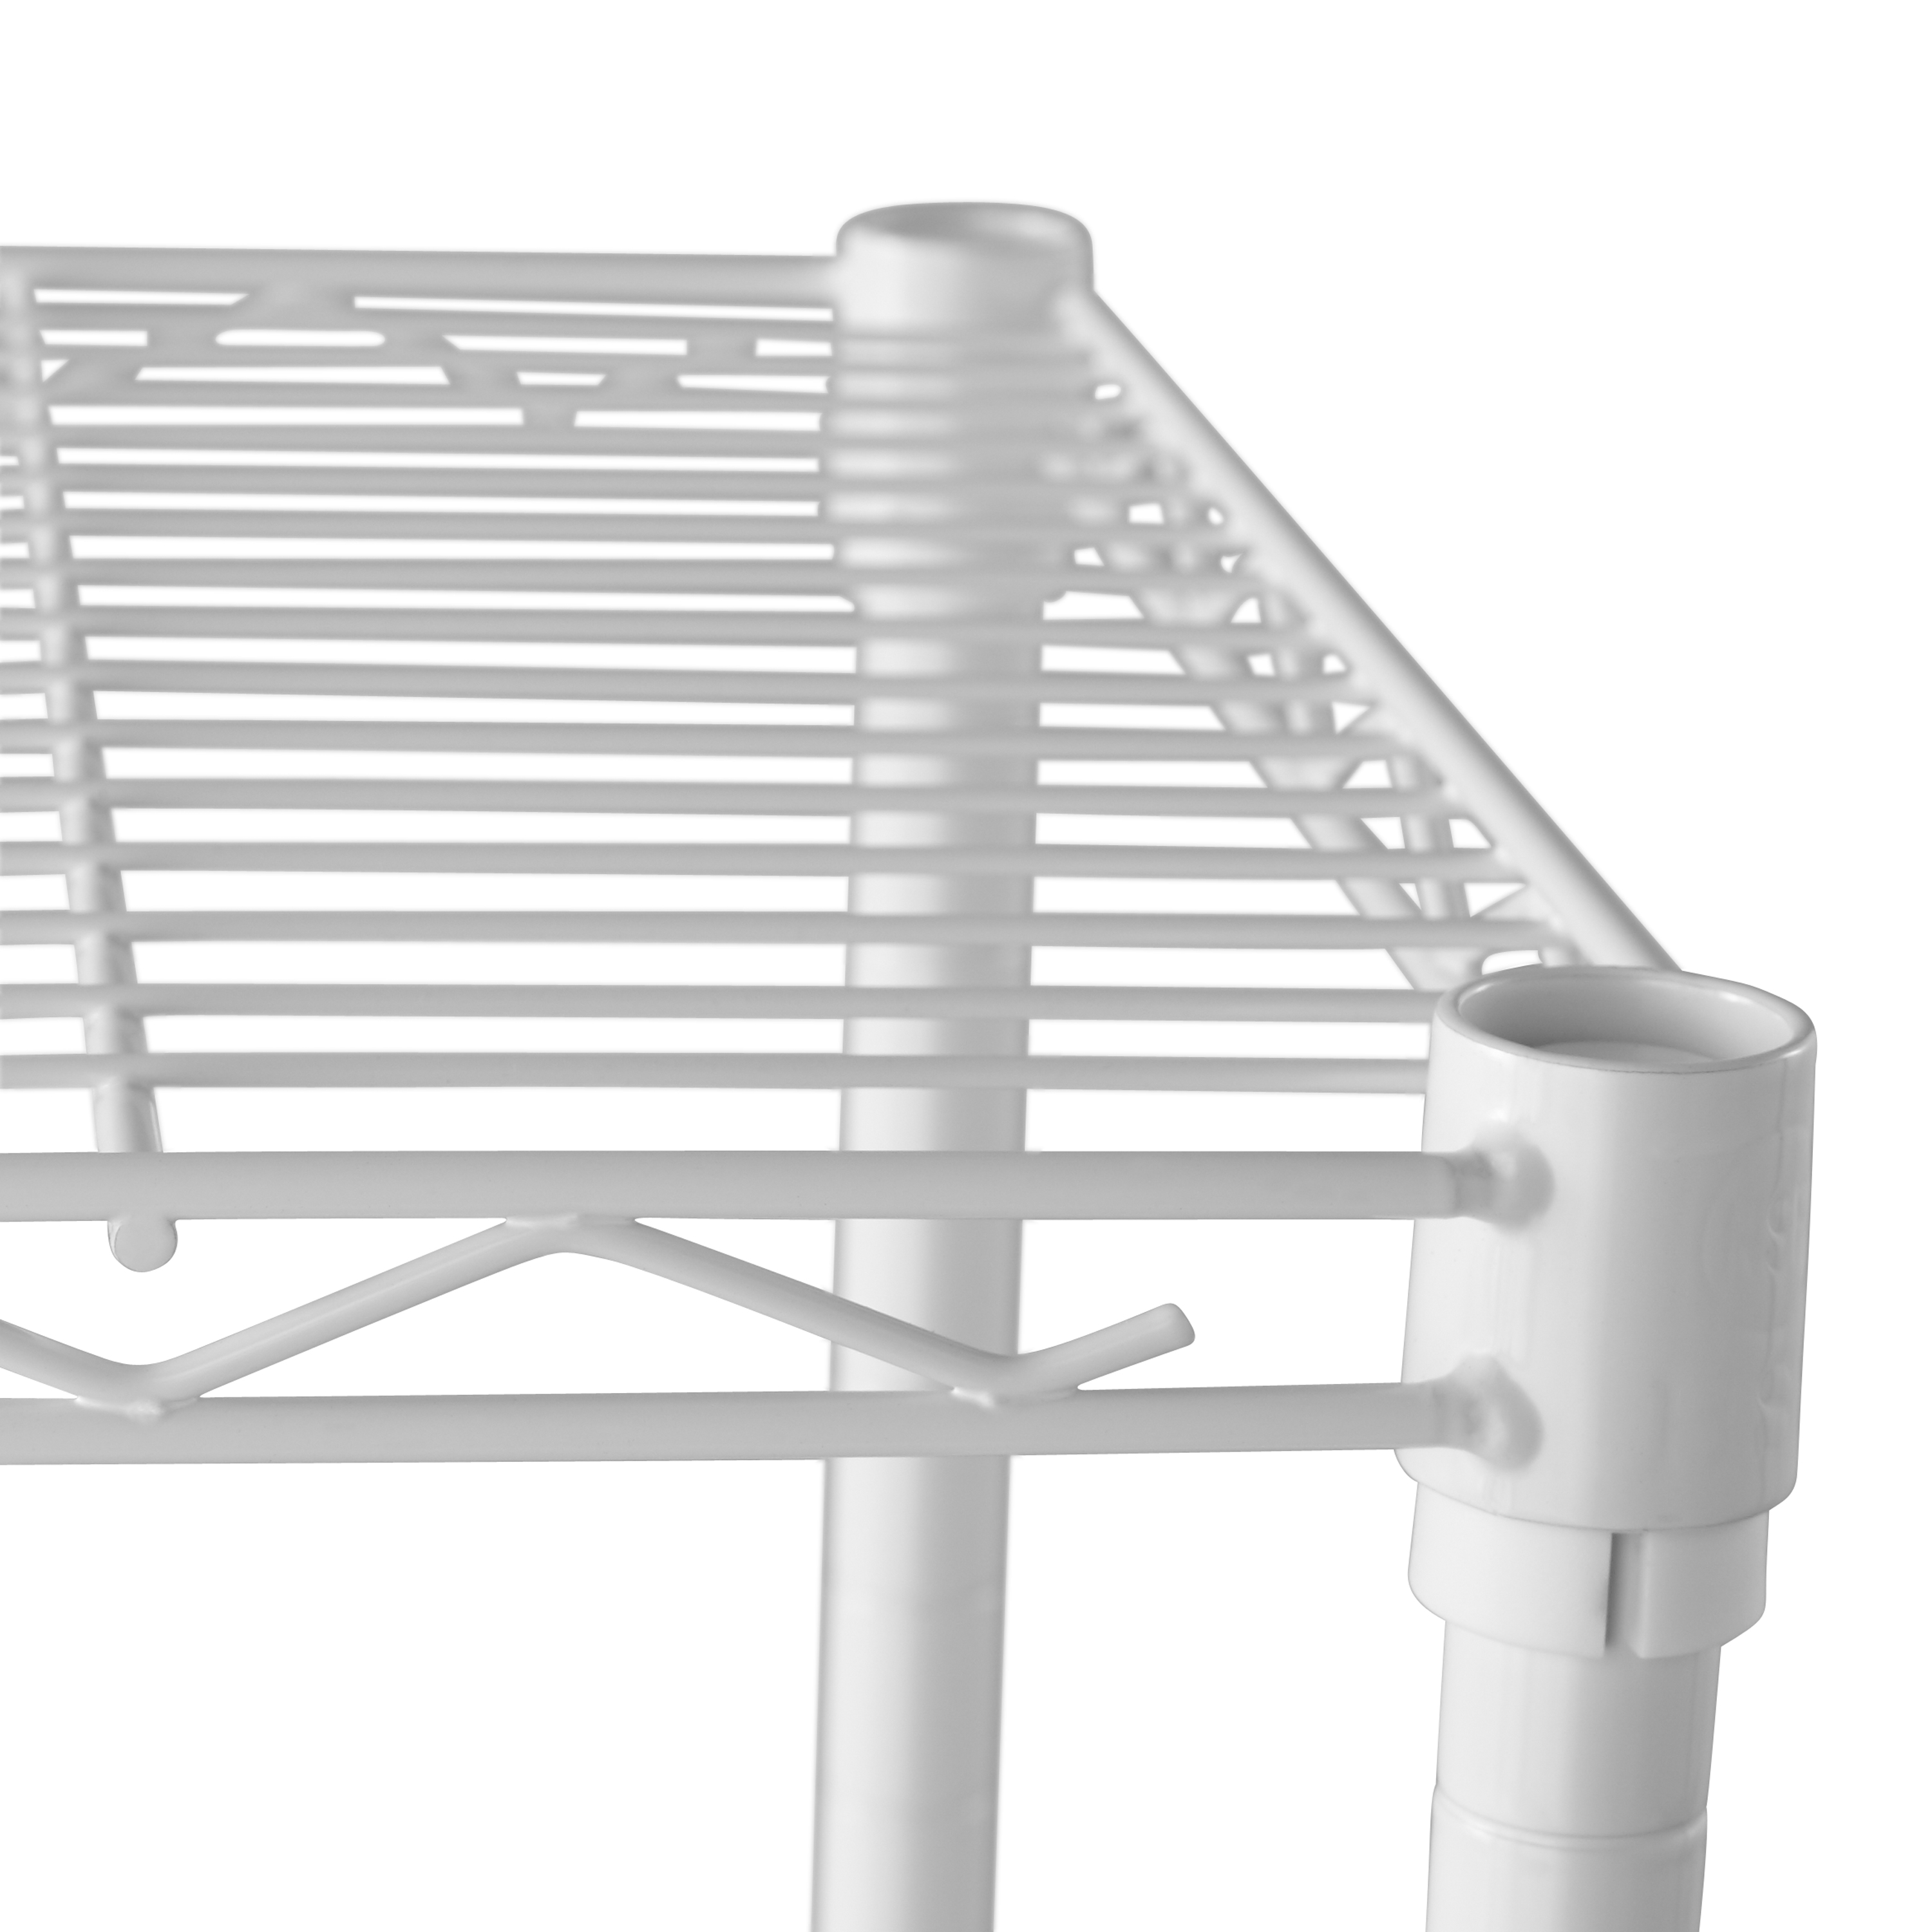 Hyper Tough 3 Tier Wire Shelving Unit,13.4"Dx23.2"Wx30.6"H, White, Weight Capacity 750 lb - image 4 of 4